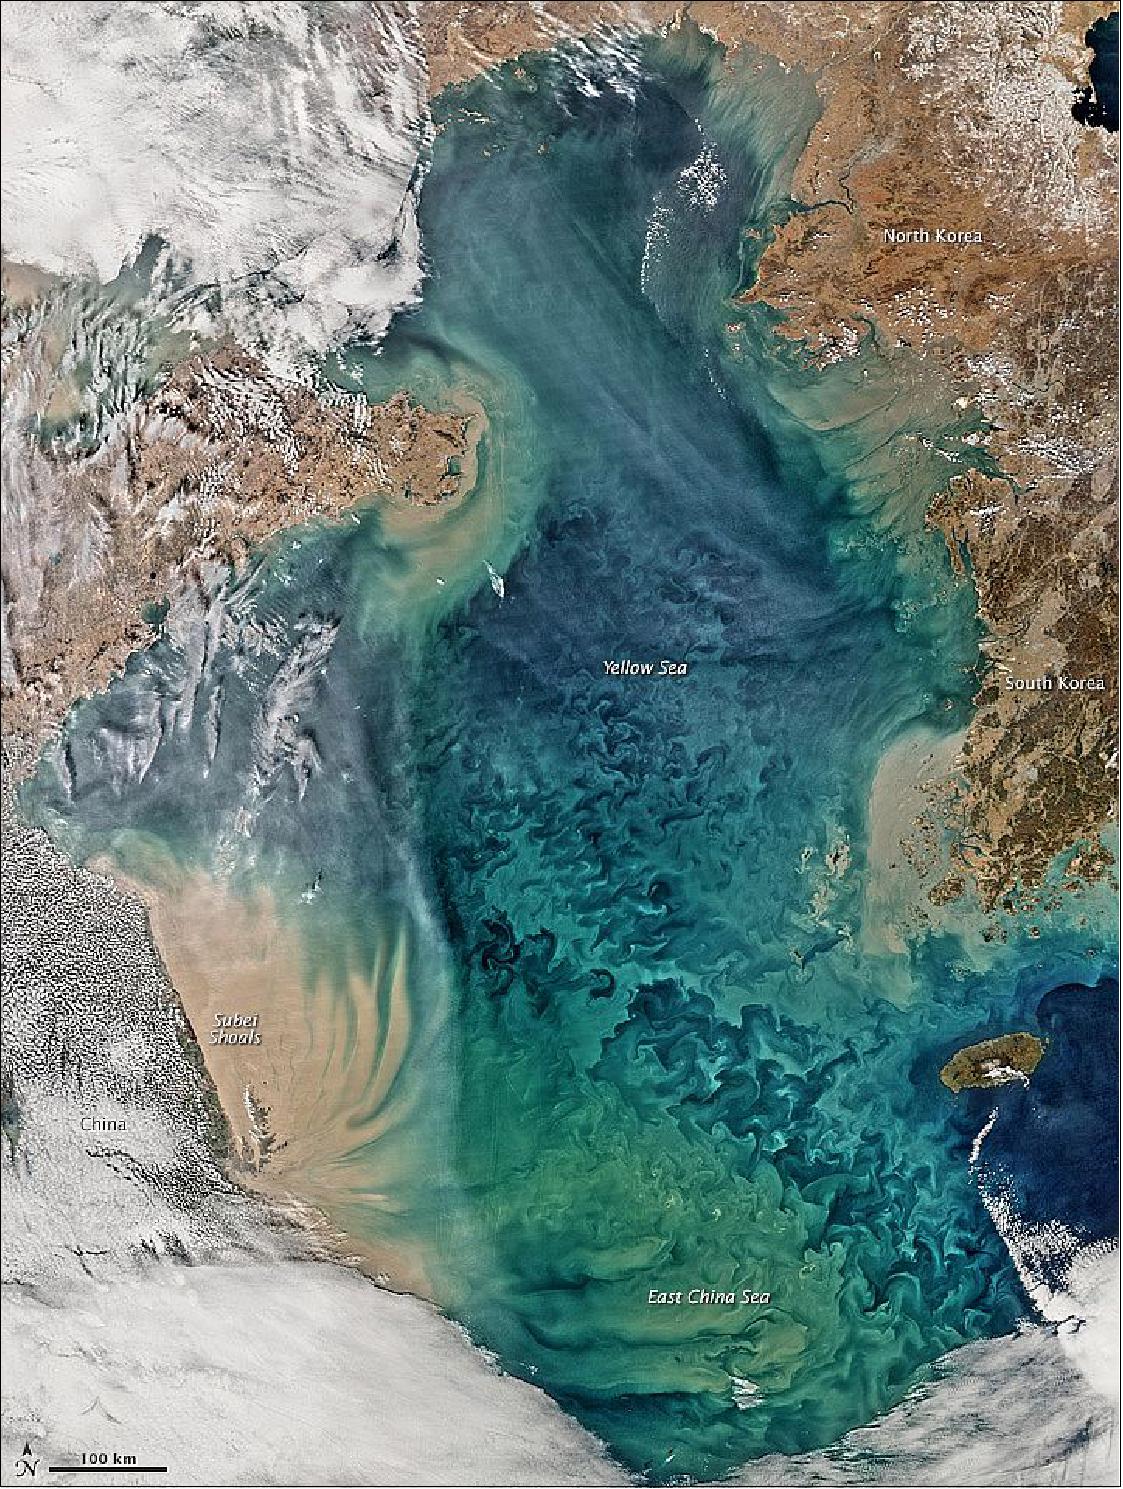 Figure 124: The Yellow Sea, pictured here in an image acquired on February 24, 2015, by the MODIS instrument on NASA’s Aqua satellite (image credit: NASA Earth Observatory)